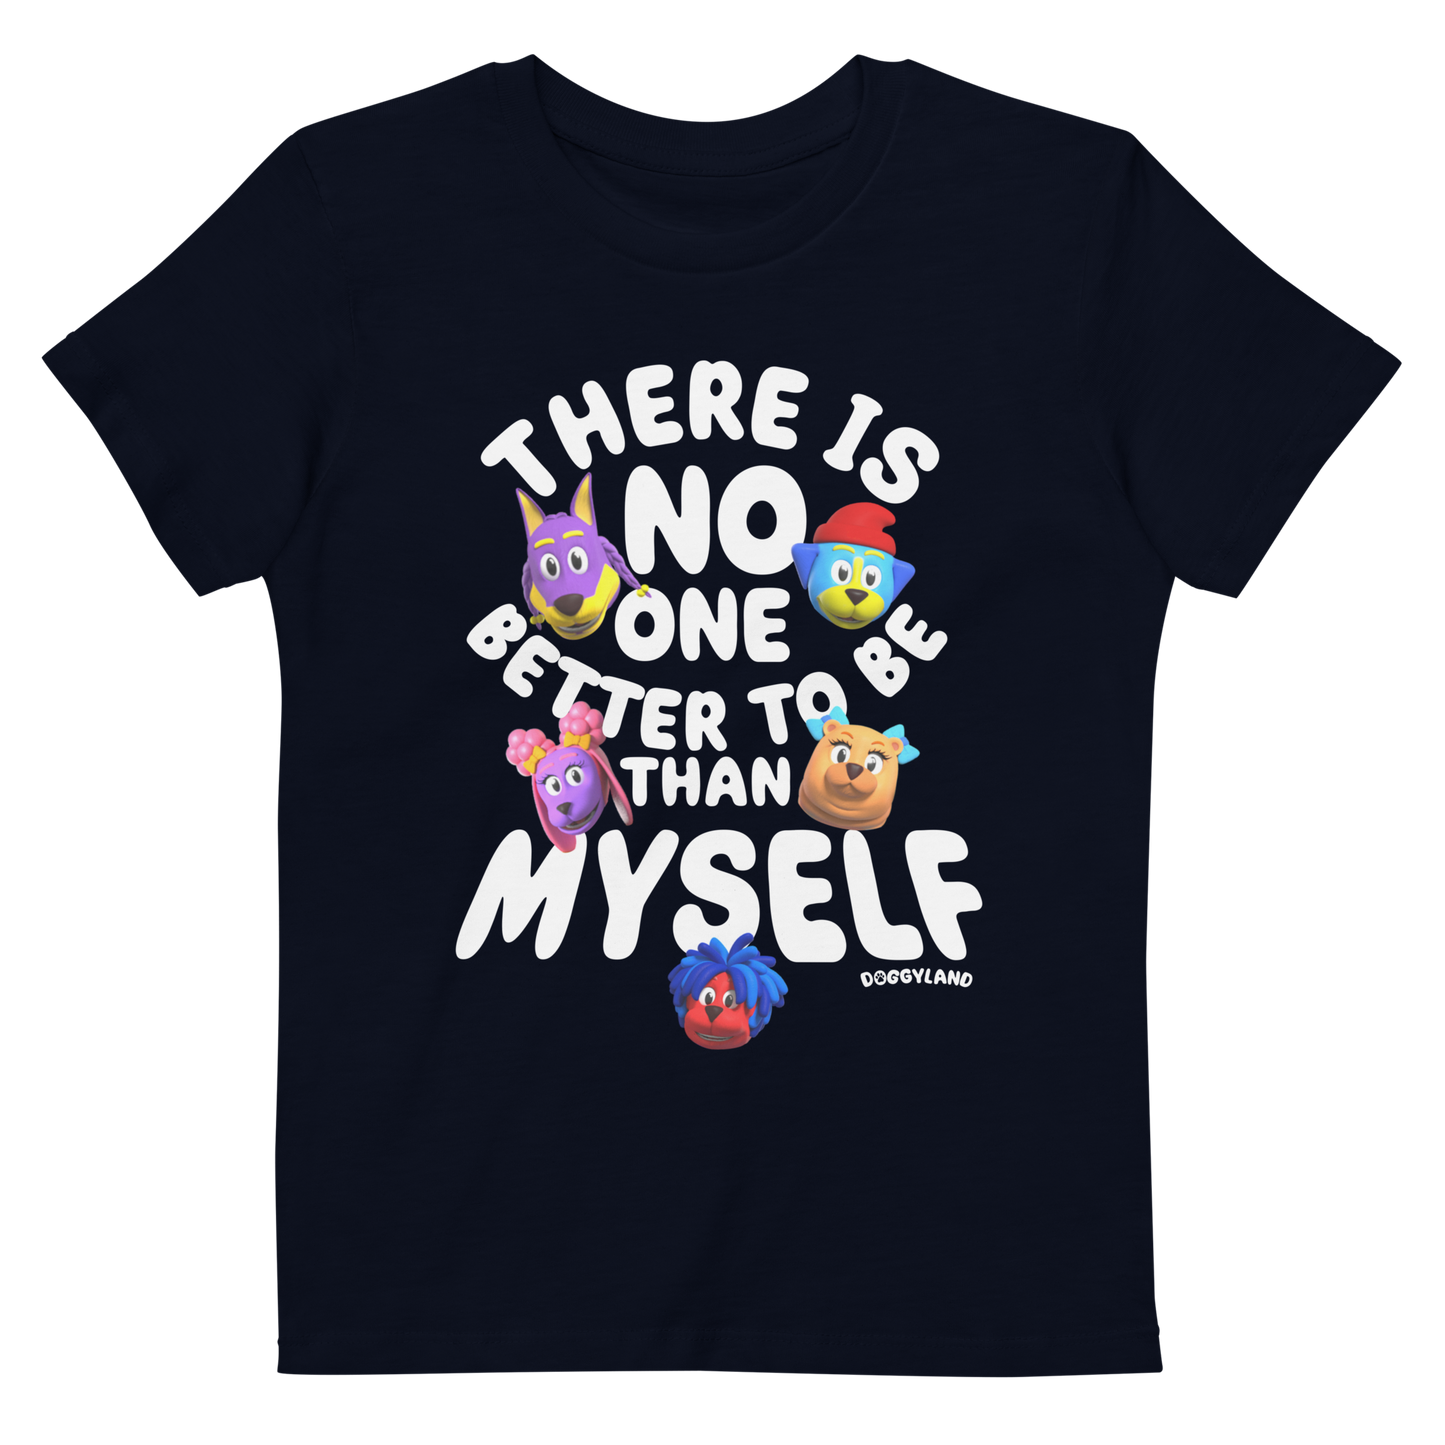 Kids Doggyland "There Is No One Better To Be Than Myself" Shirt